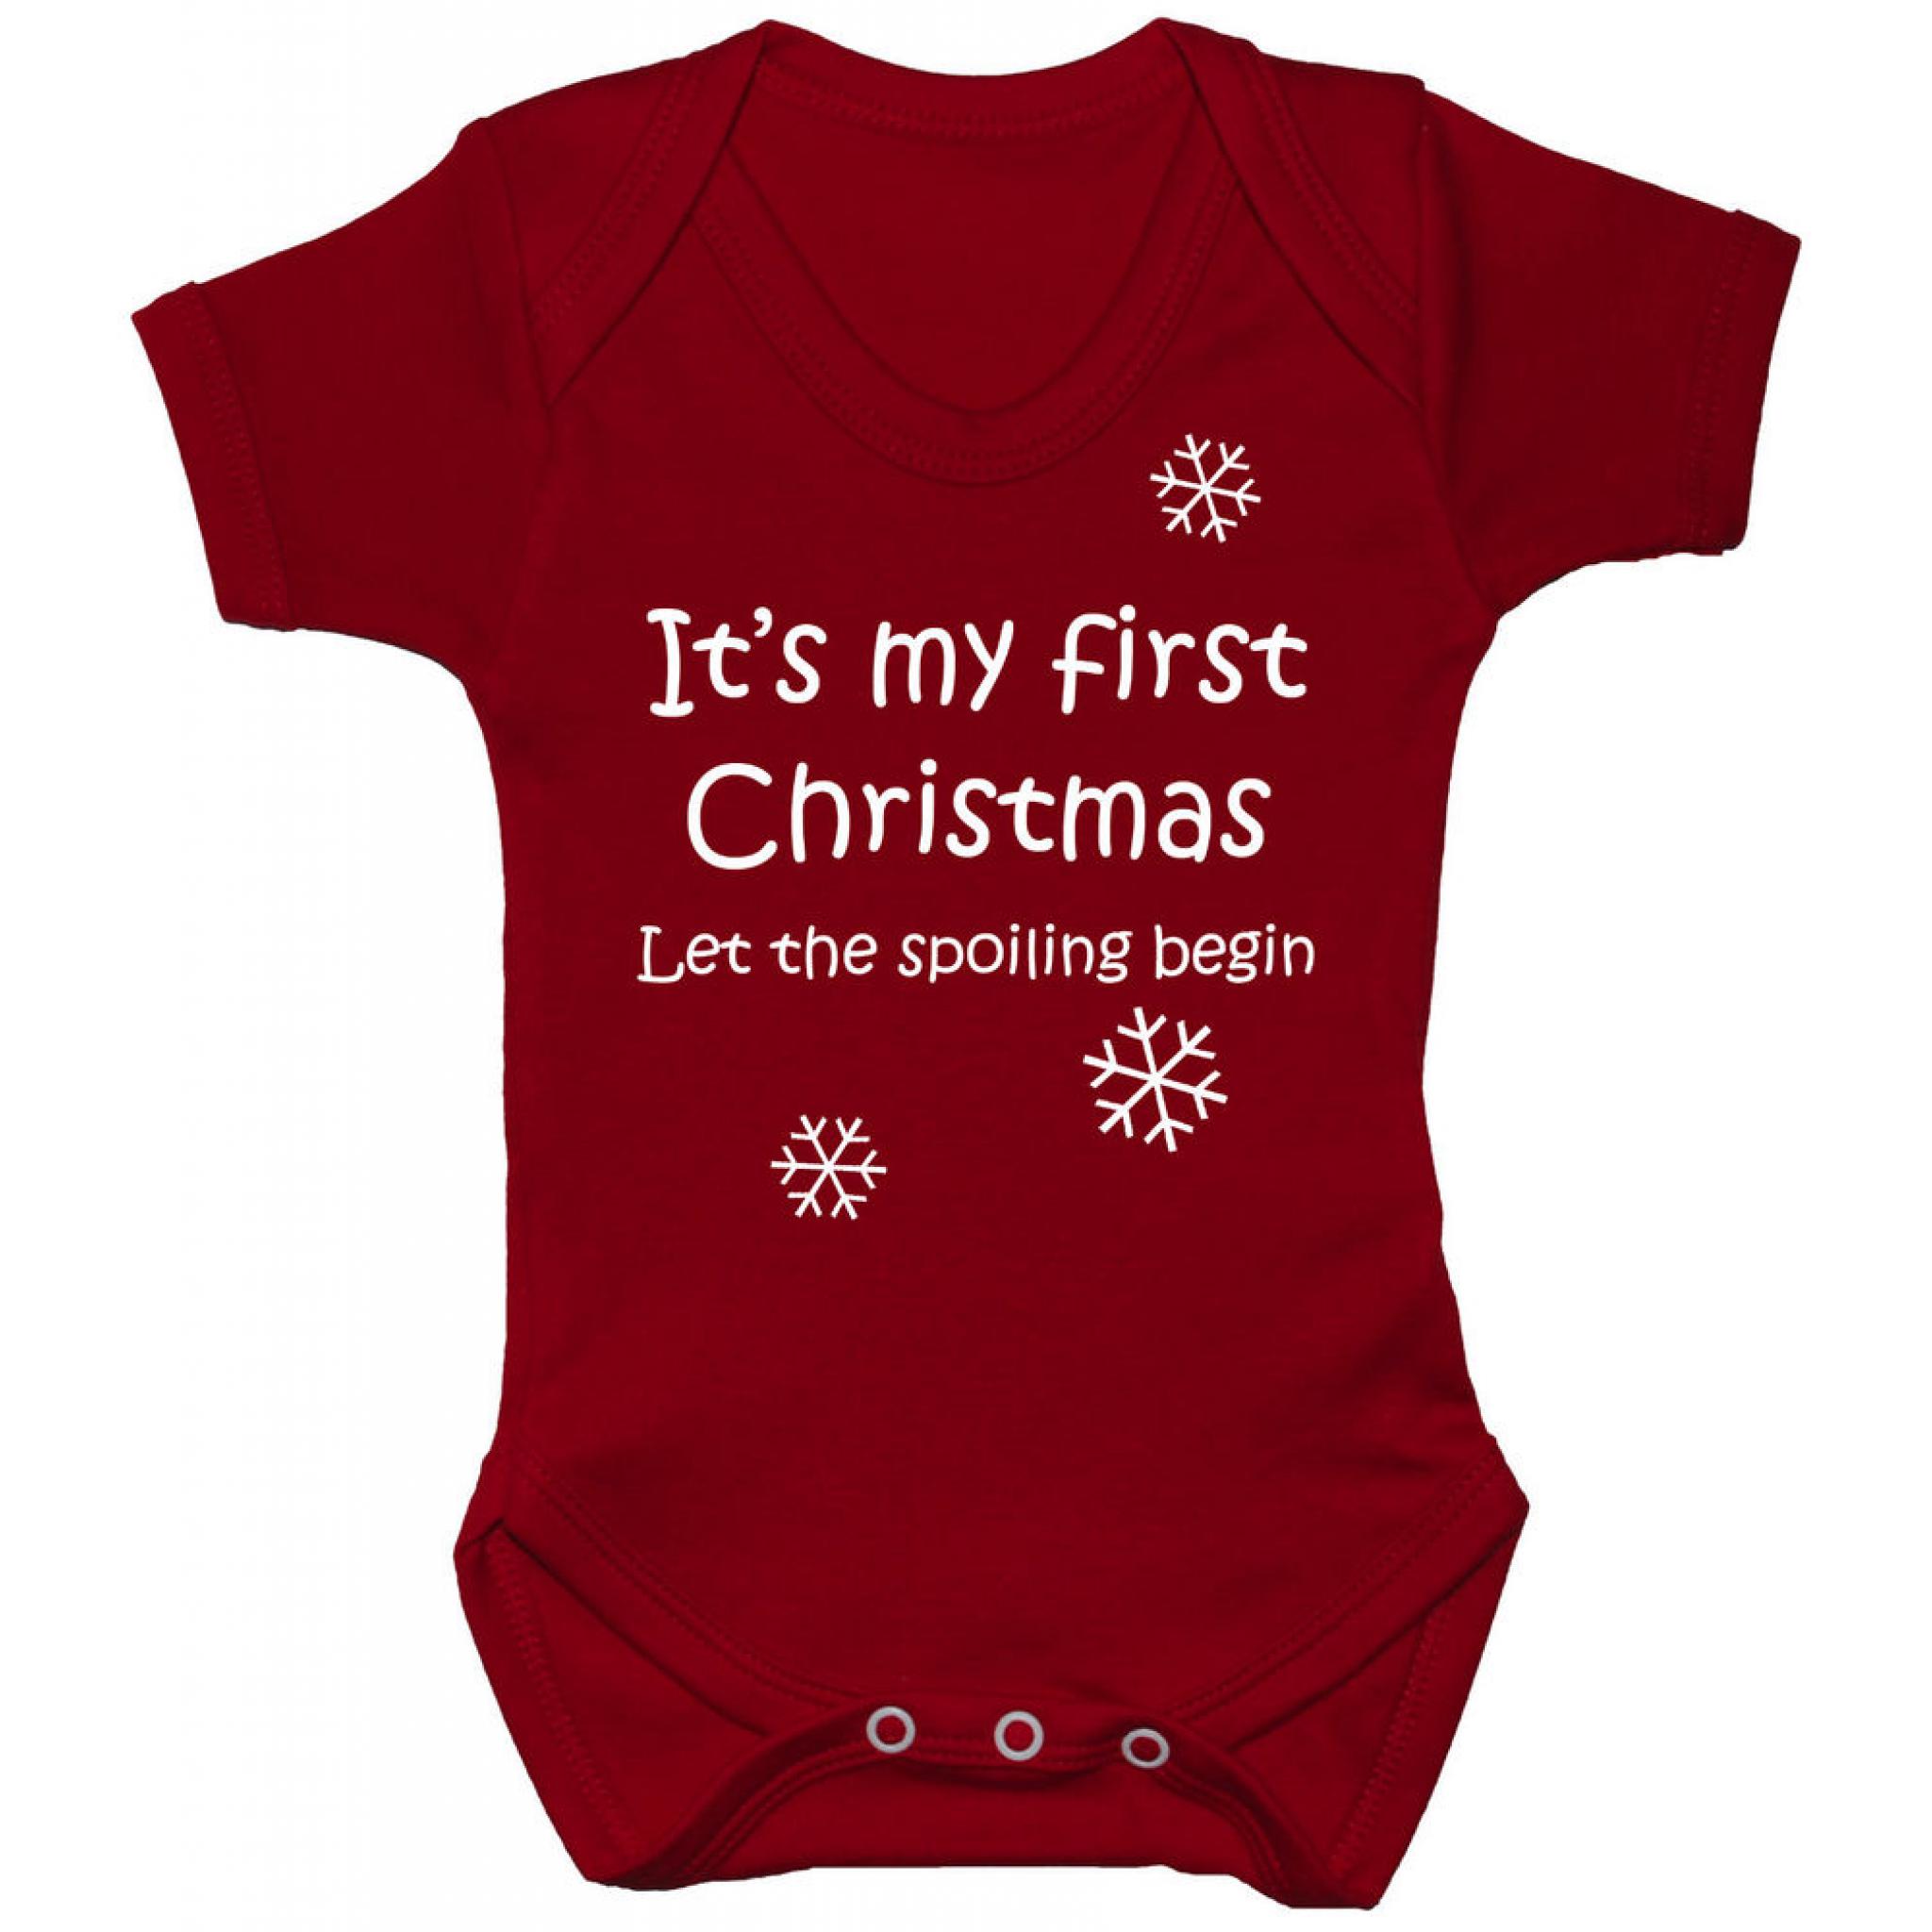 my first christmas baby romper